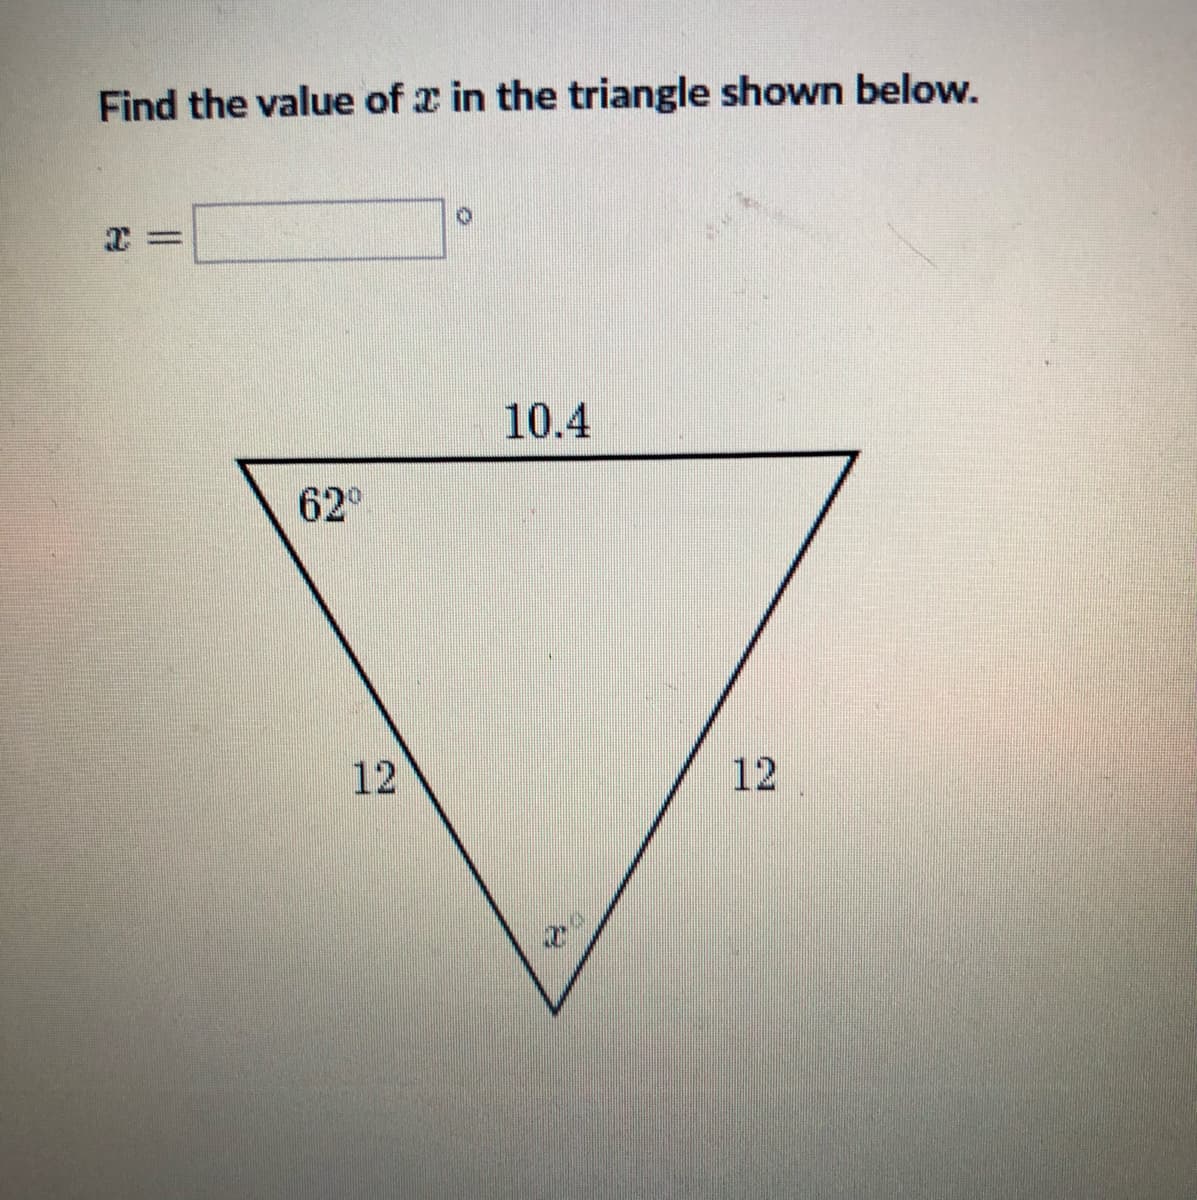 Find the value of x in the triangle shown below.
3D%=
10.4
62°
12
12
